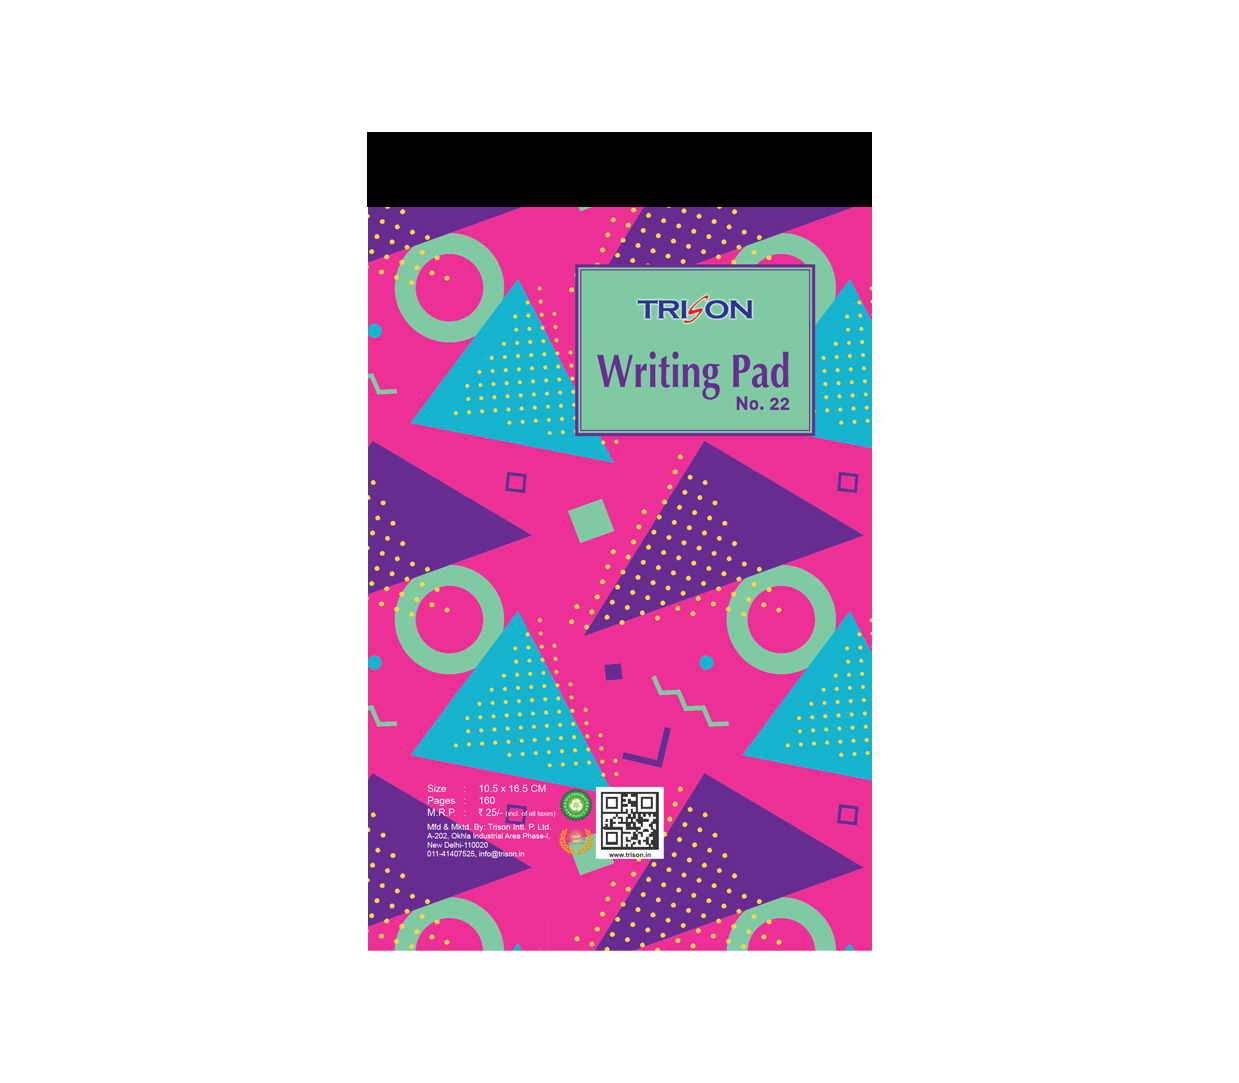 Trison Writing Pad No. 22 (10.5 X 16.5 cm) - Pack of 5